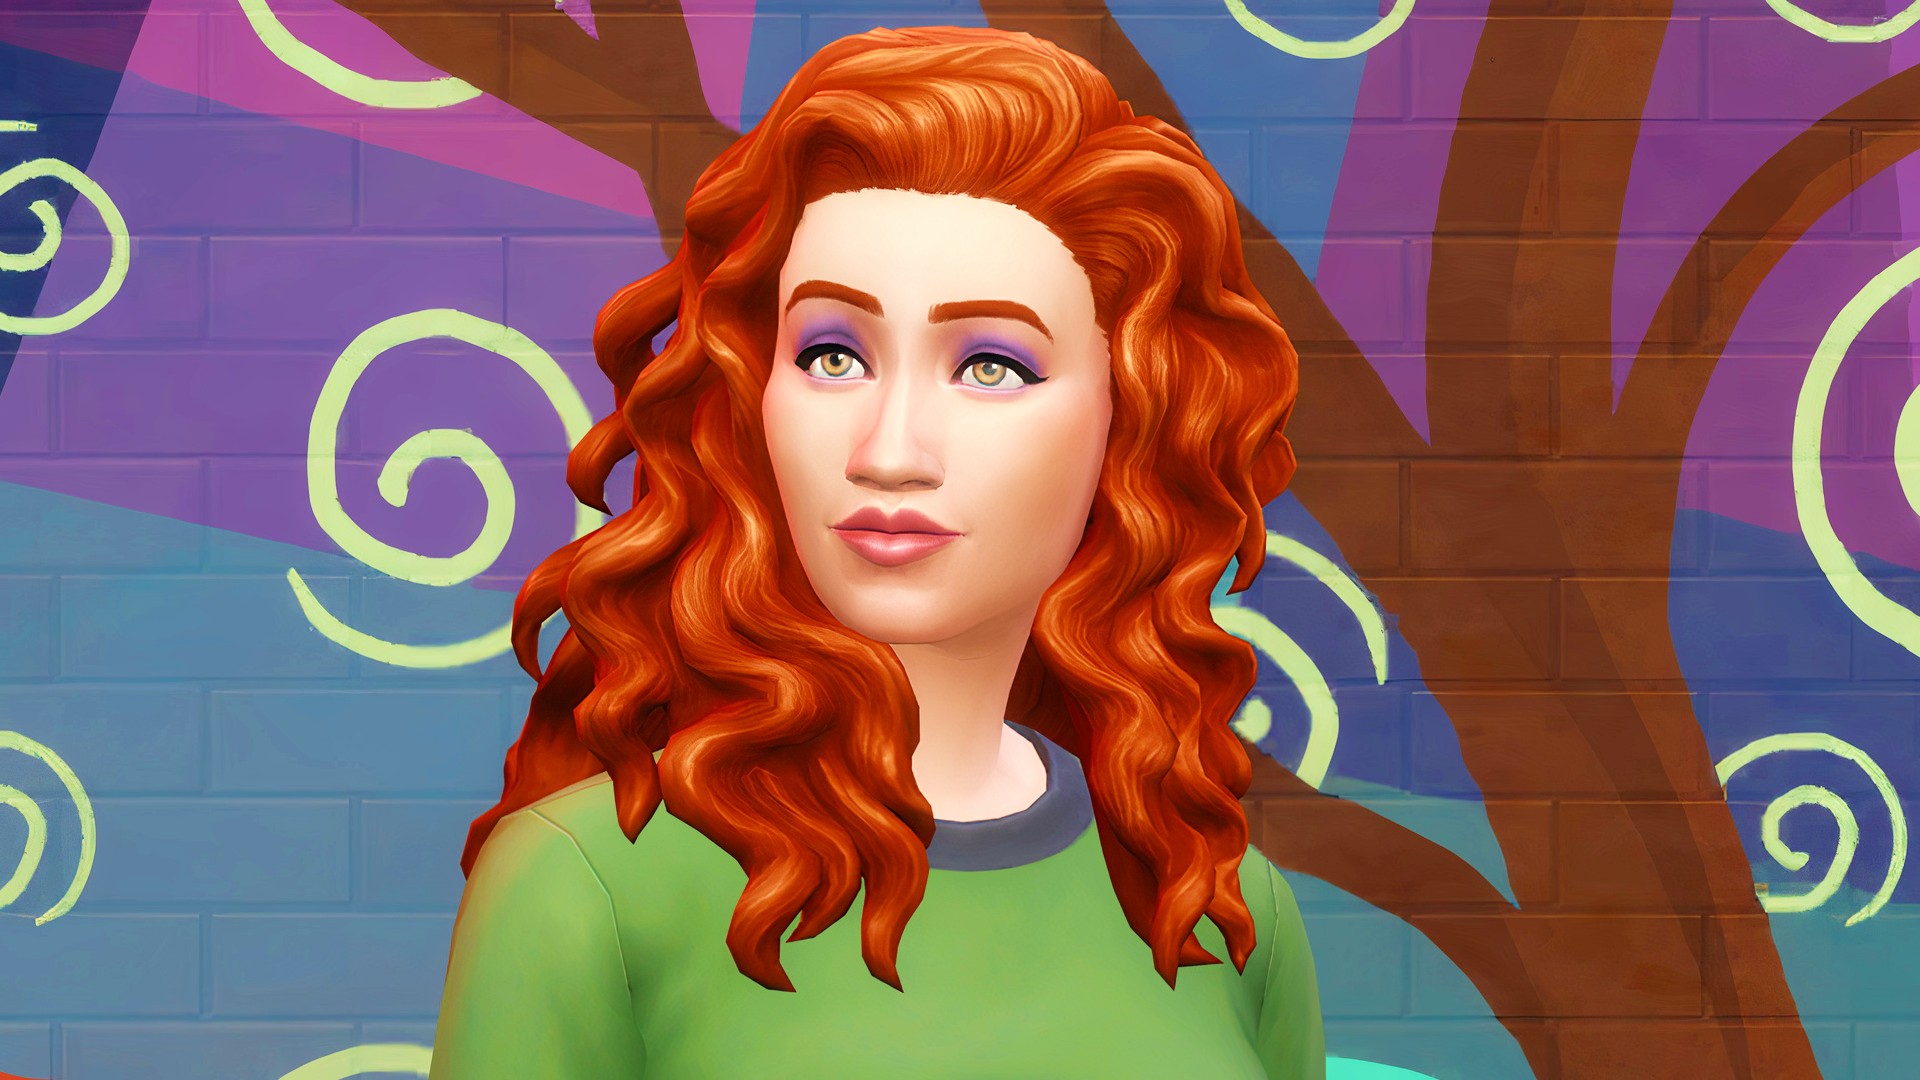 Sims 4 CC hair gets Maxis Match Disney Dreamlight Valley crossover